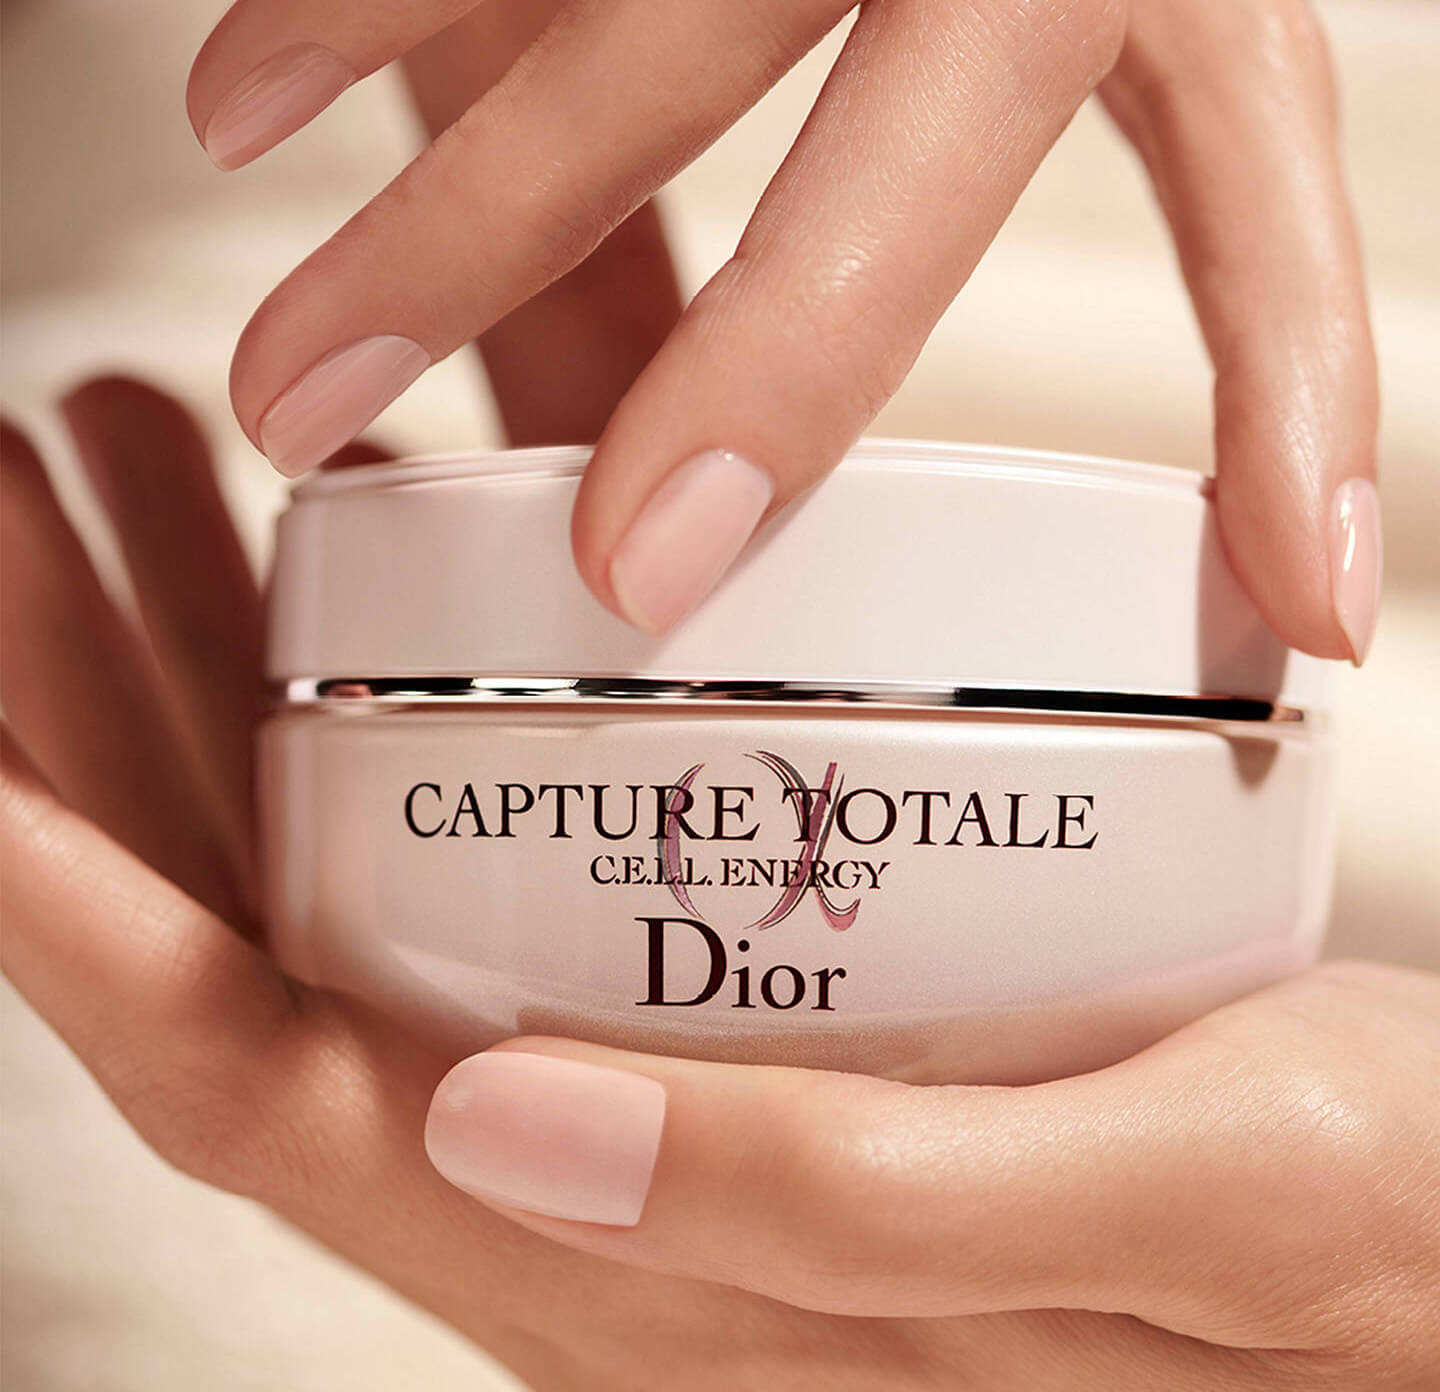 DiorCapture Totale Cell Energy Firming & Wrinkle-Correcting Creme 15 ml  ʺ¼ 鹿ټҧ Ҷ֧㨢ͧ͵çҨѴѭҳ·Ŵ觻觡Шҧ ͹ آҾ觢㹷ءǧ